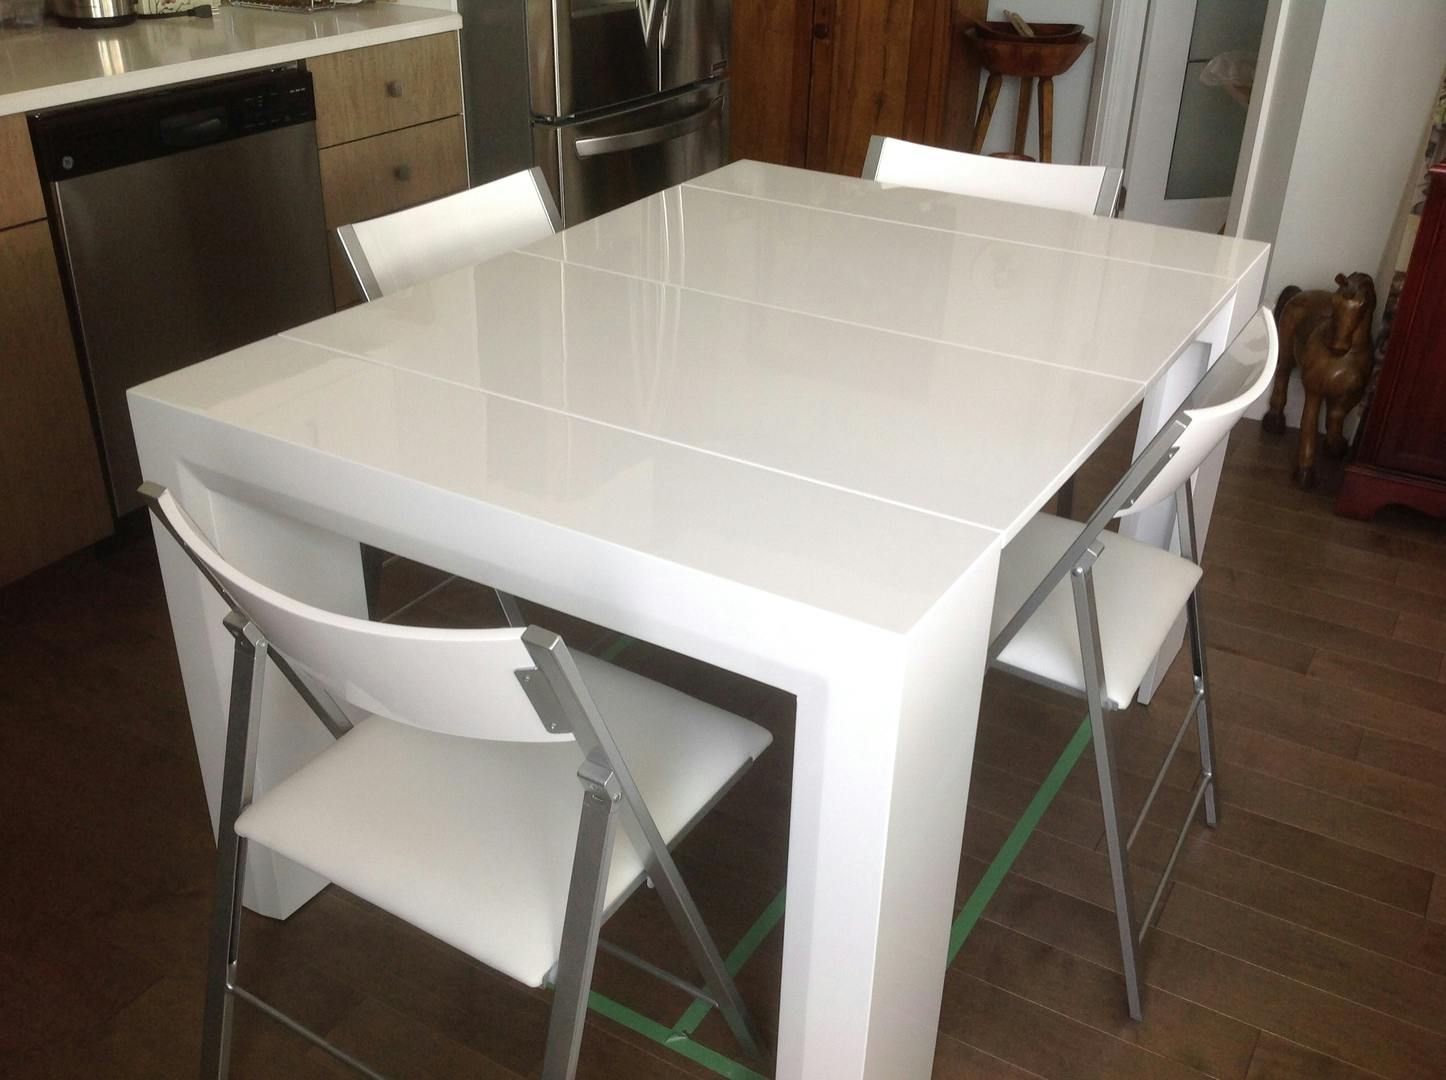 Junior Giant Extending Table Set with Chairs | Expand ...